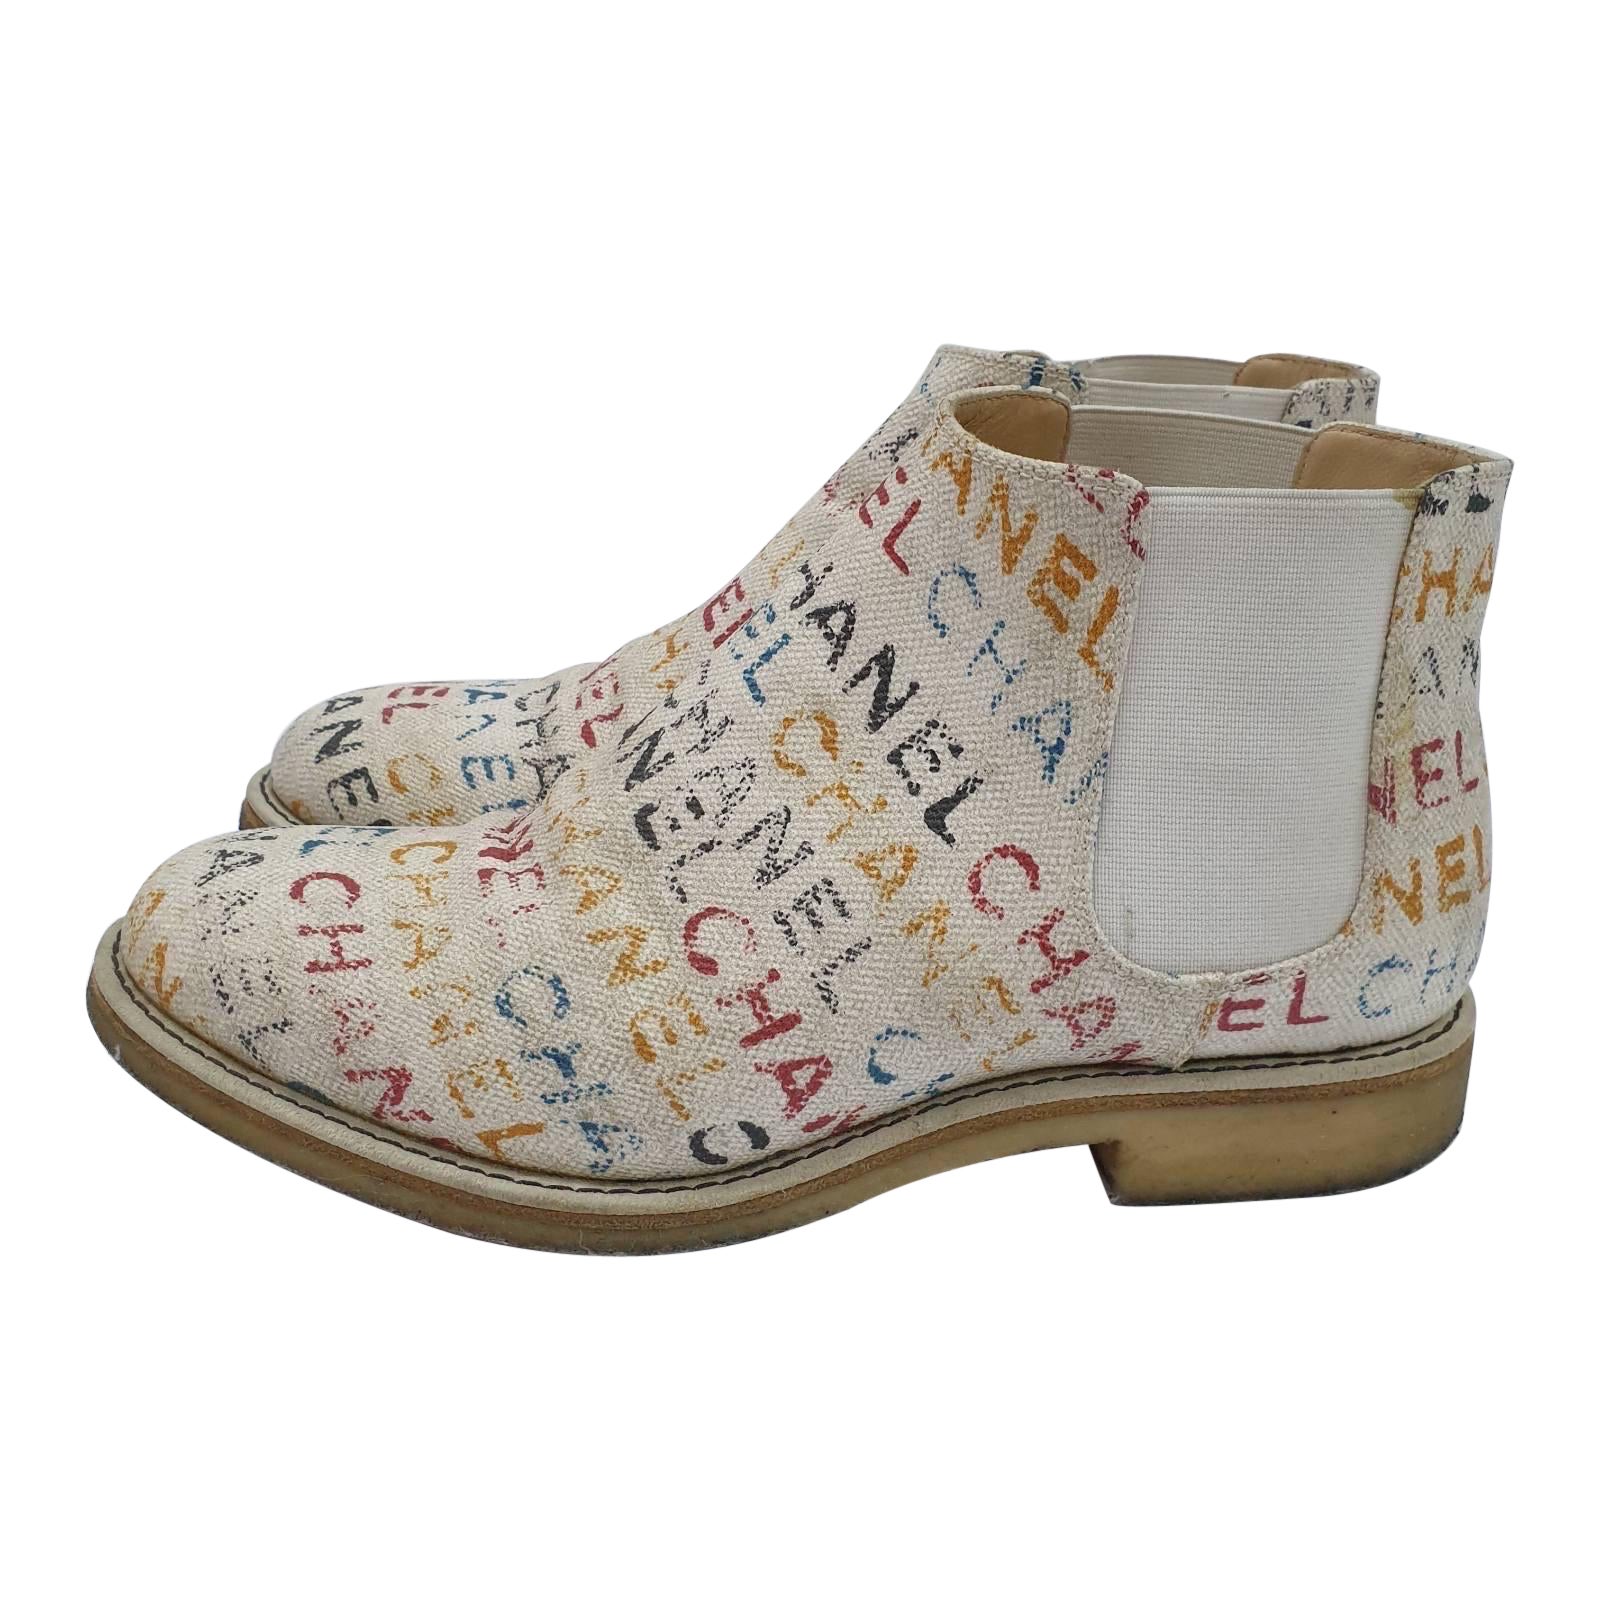 Chanel Canvas Boots - 9 For Sale on 1stDibs